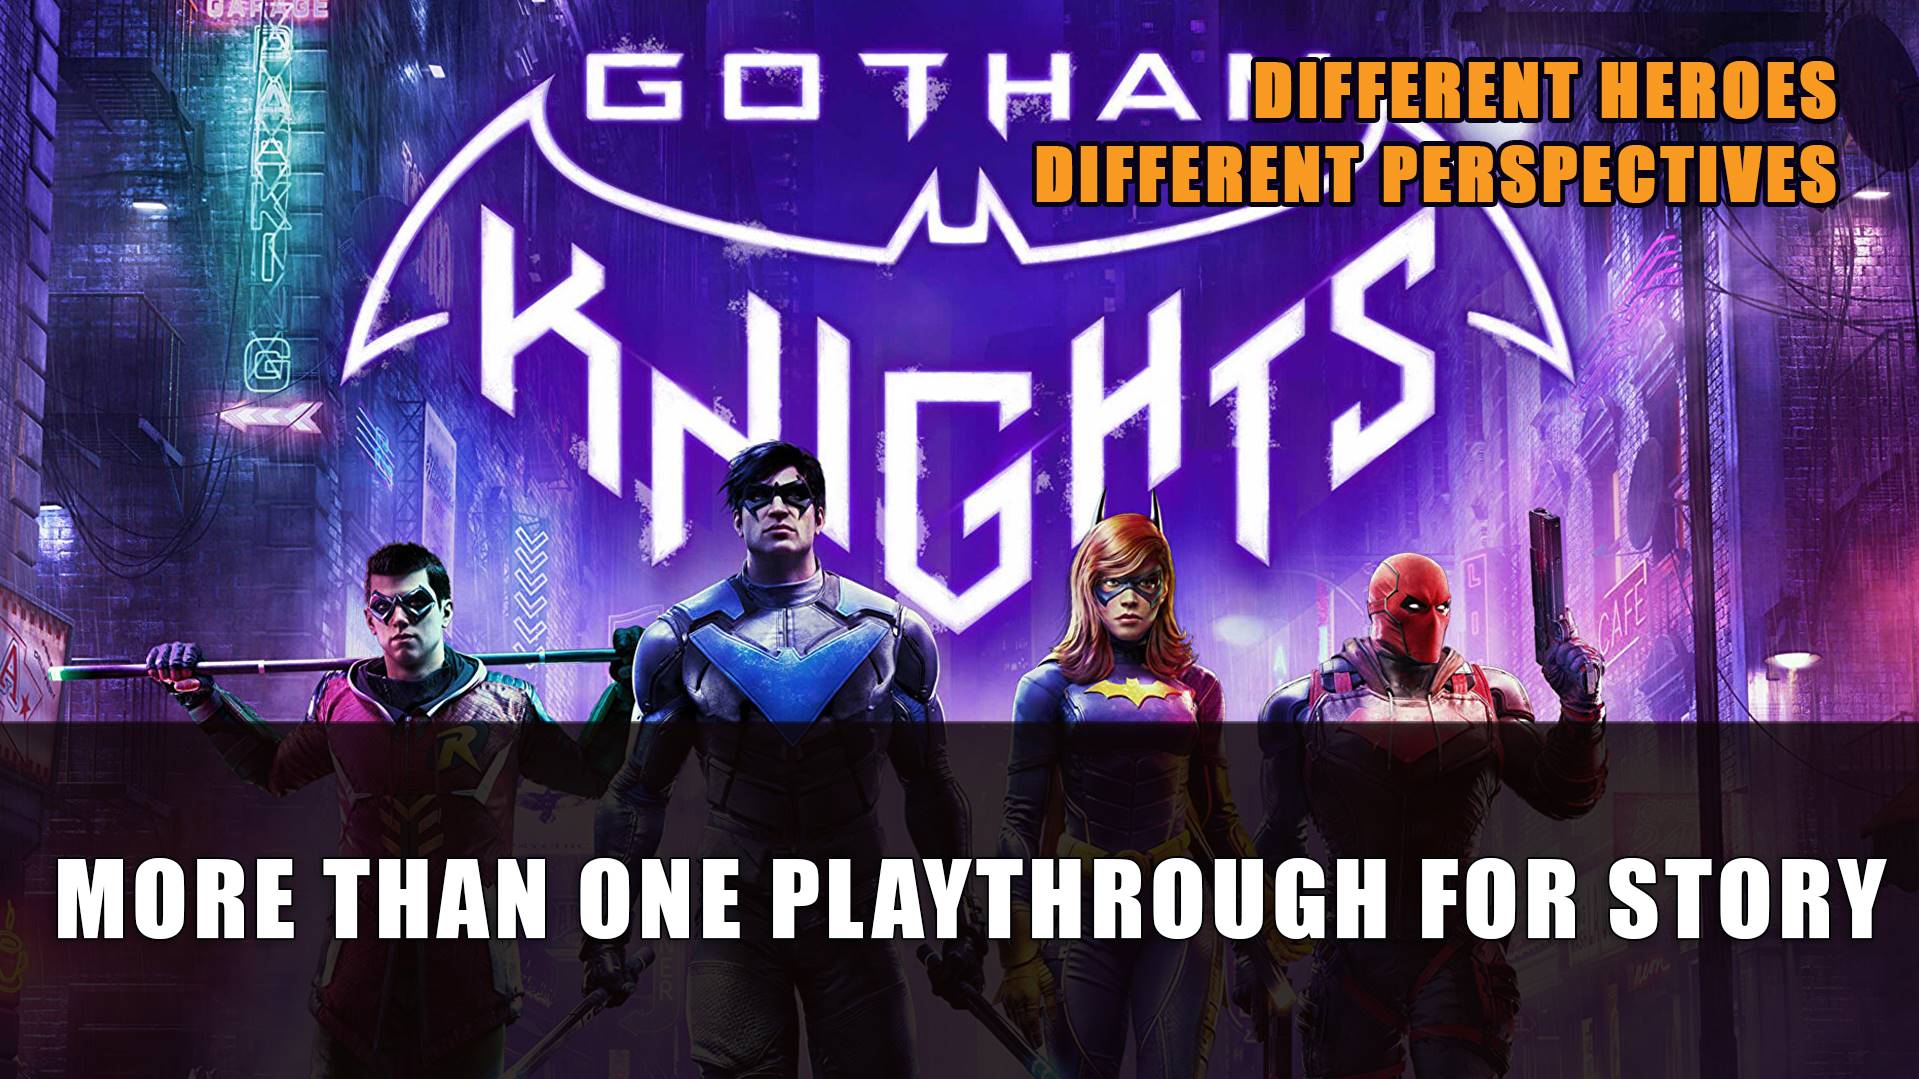 What The Critics Are Saying About Gotham Knights